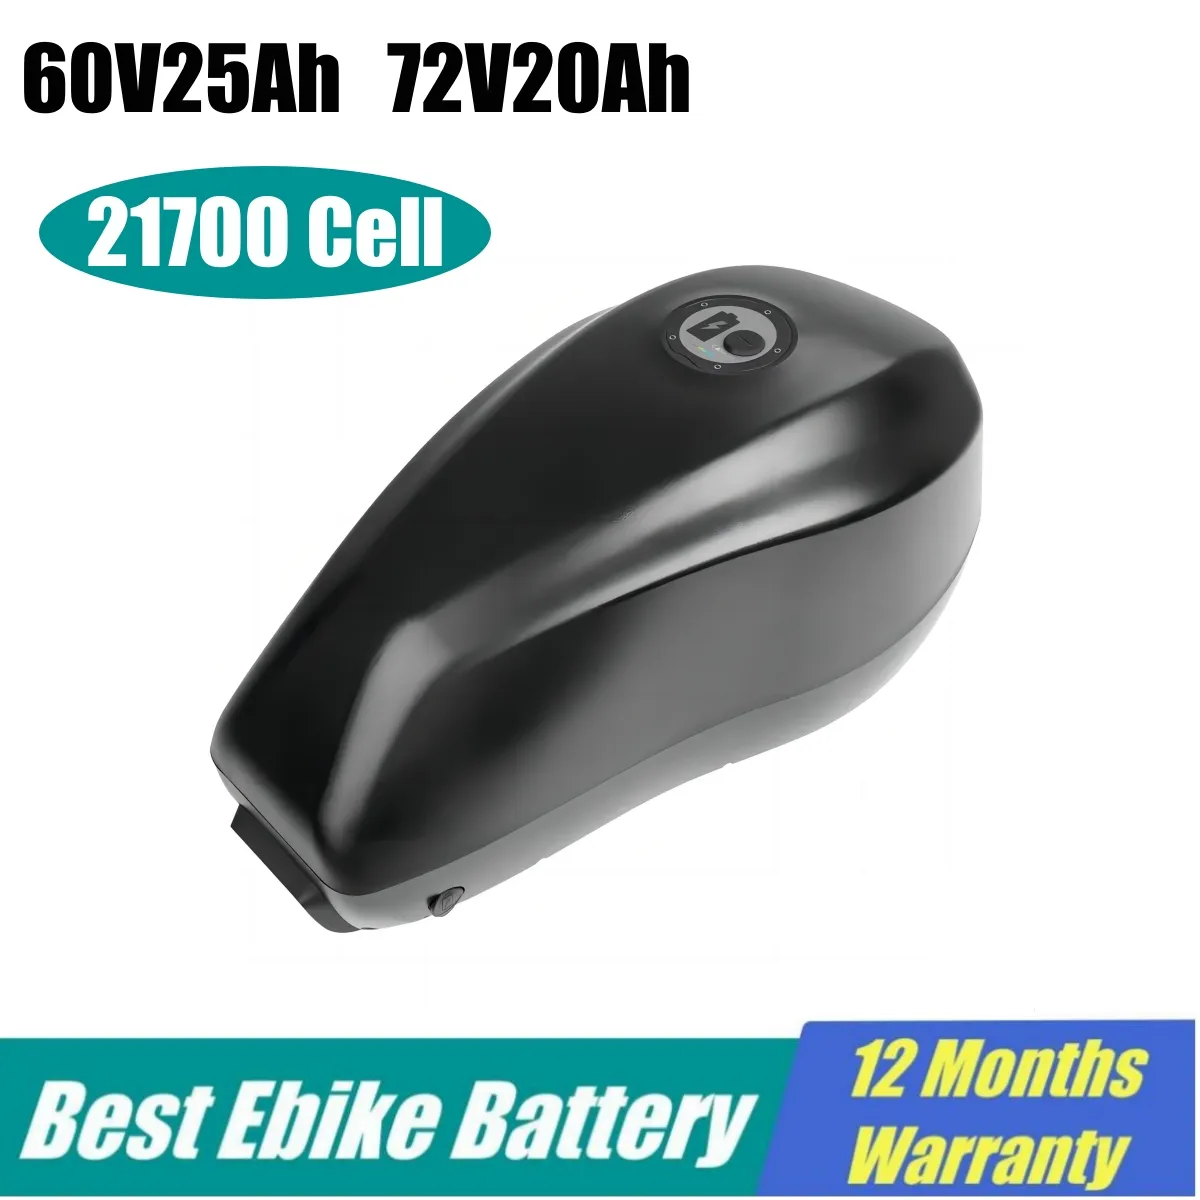 60V 72V Ebike Battery 21700 Cell 20ahh 30ah Bicycle Bateria Pack for Bafang TSDZ2 2000W 1500W 1000W 750W 500W MOTOR